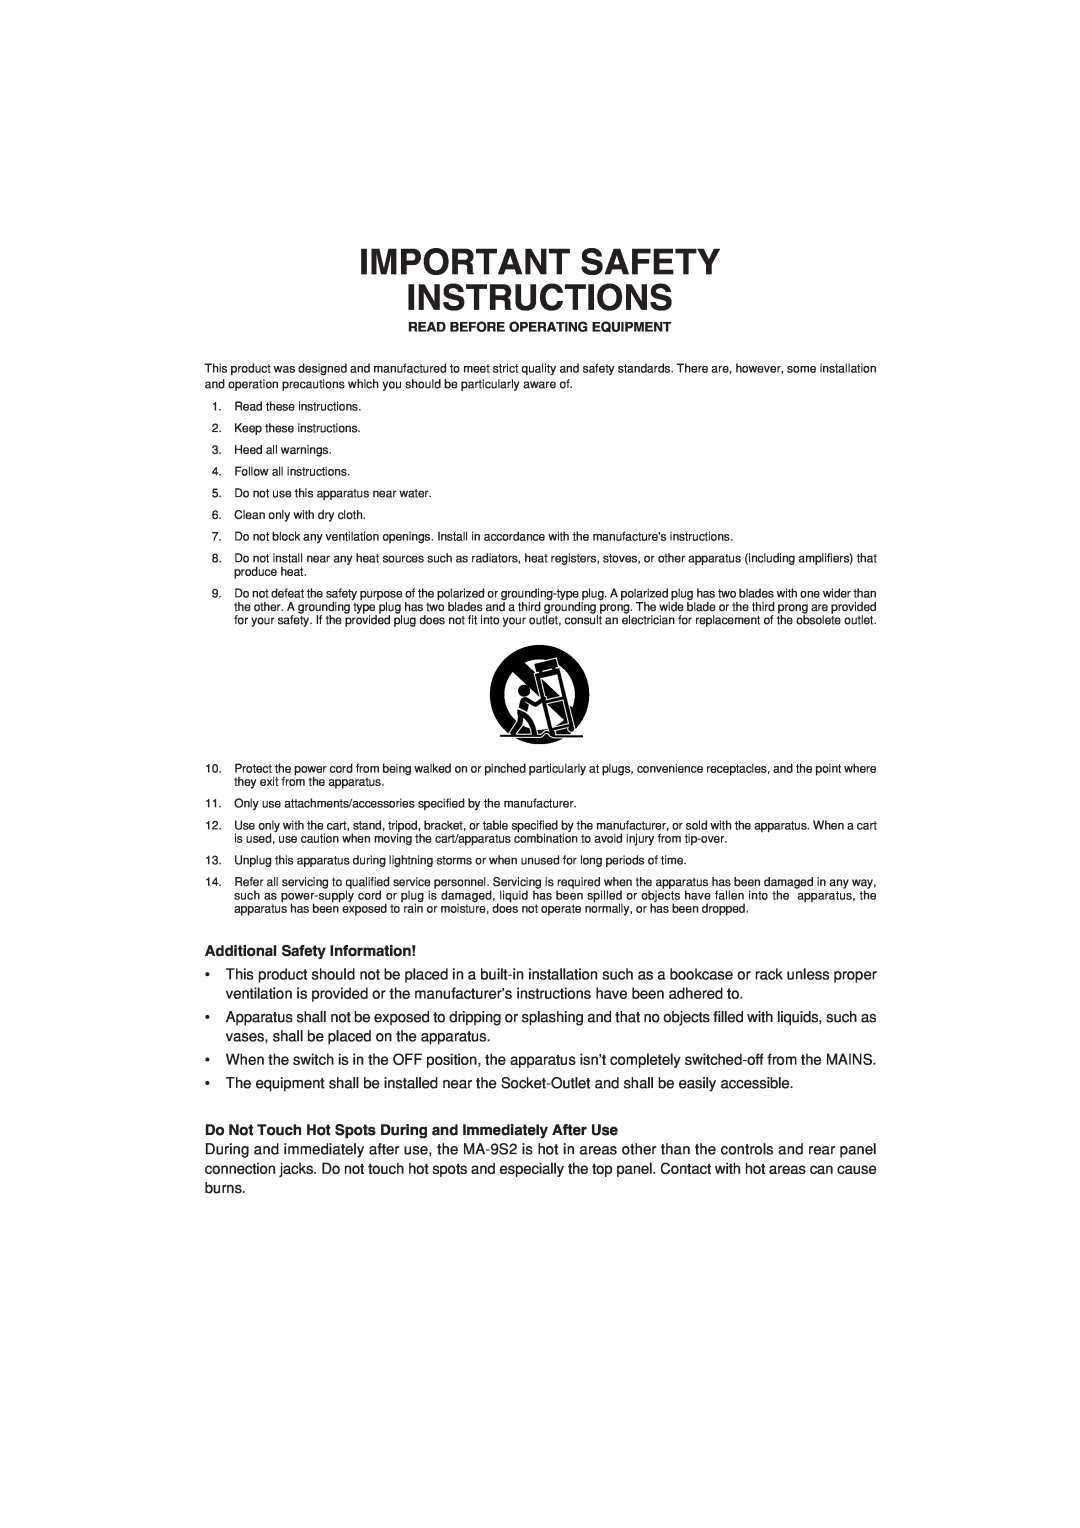 Marantz MA-9S2 manual Important Safety Instructions, Additional Safety Information 